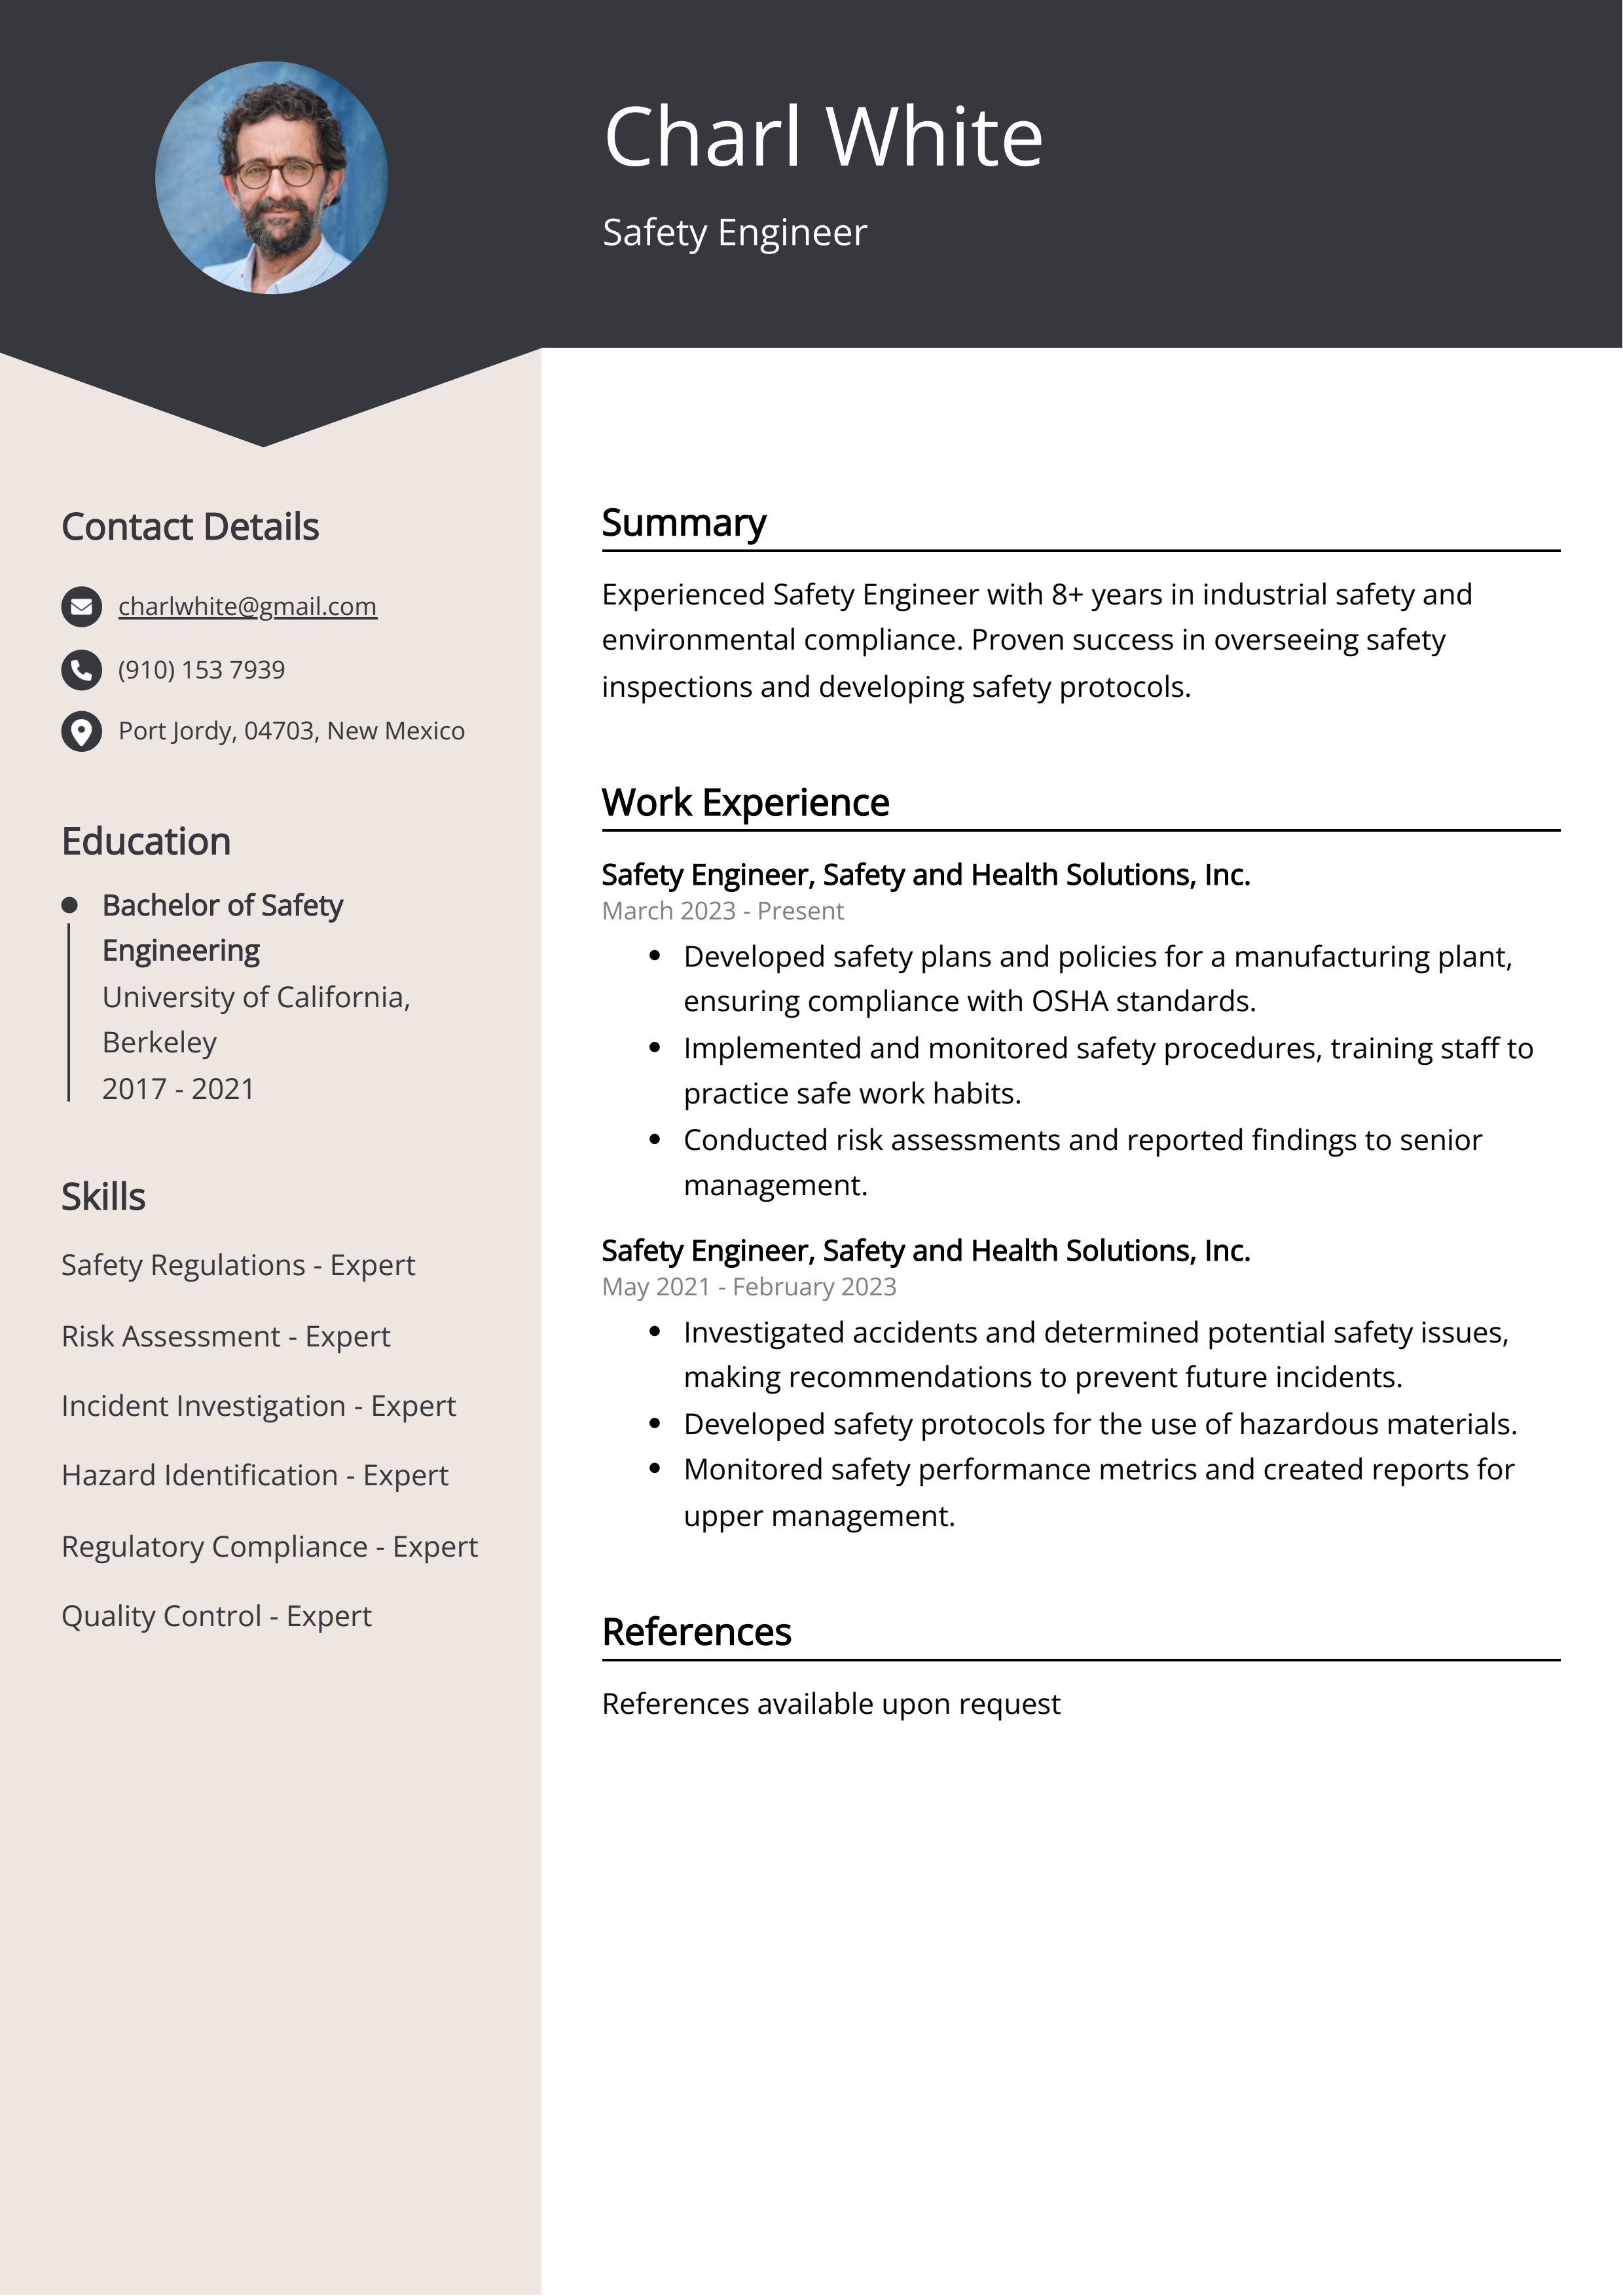 Safety Engineer CV Example